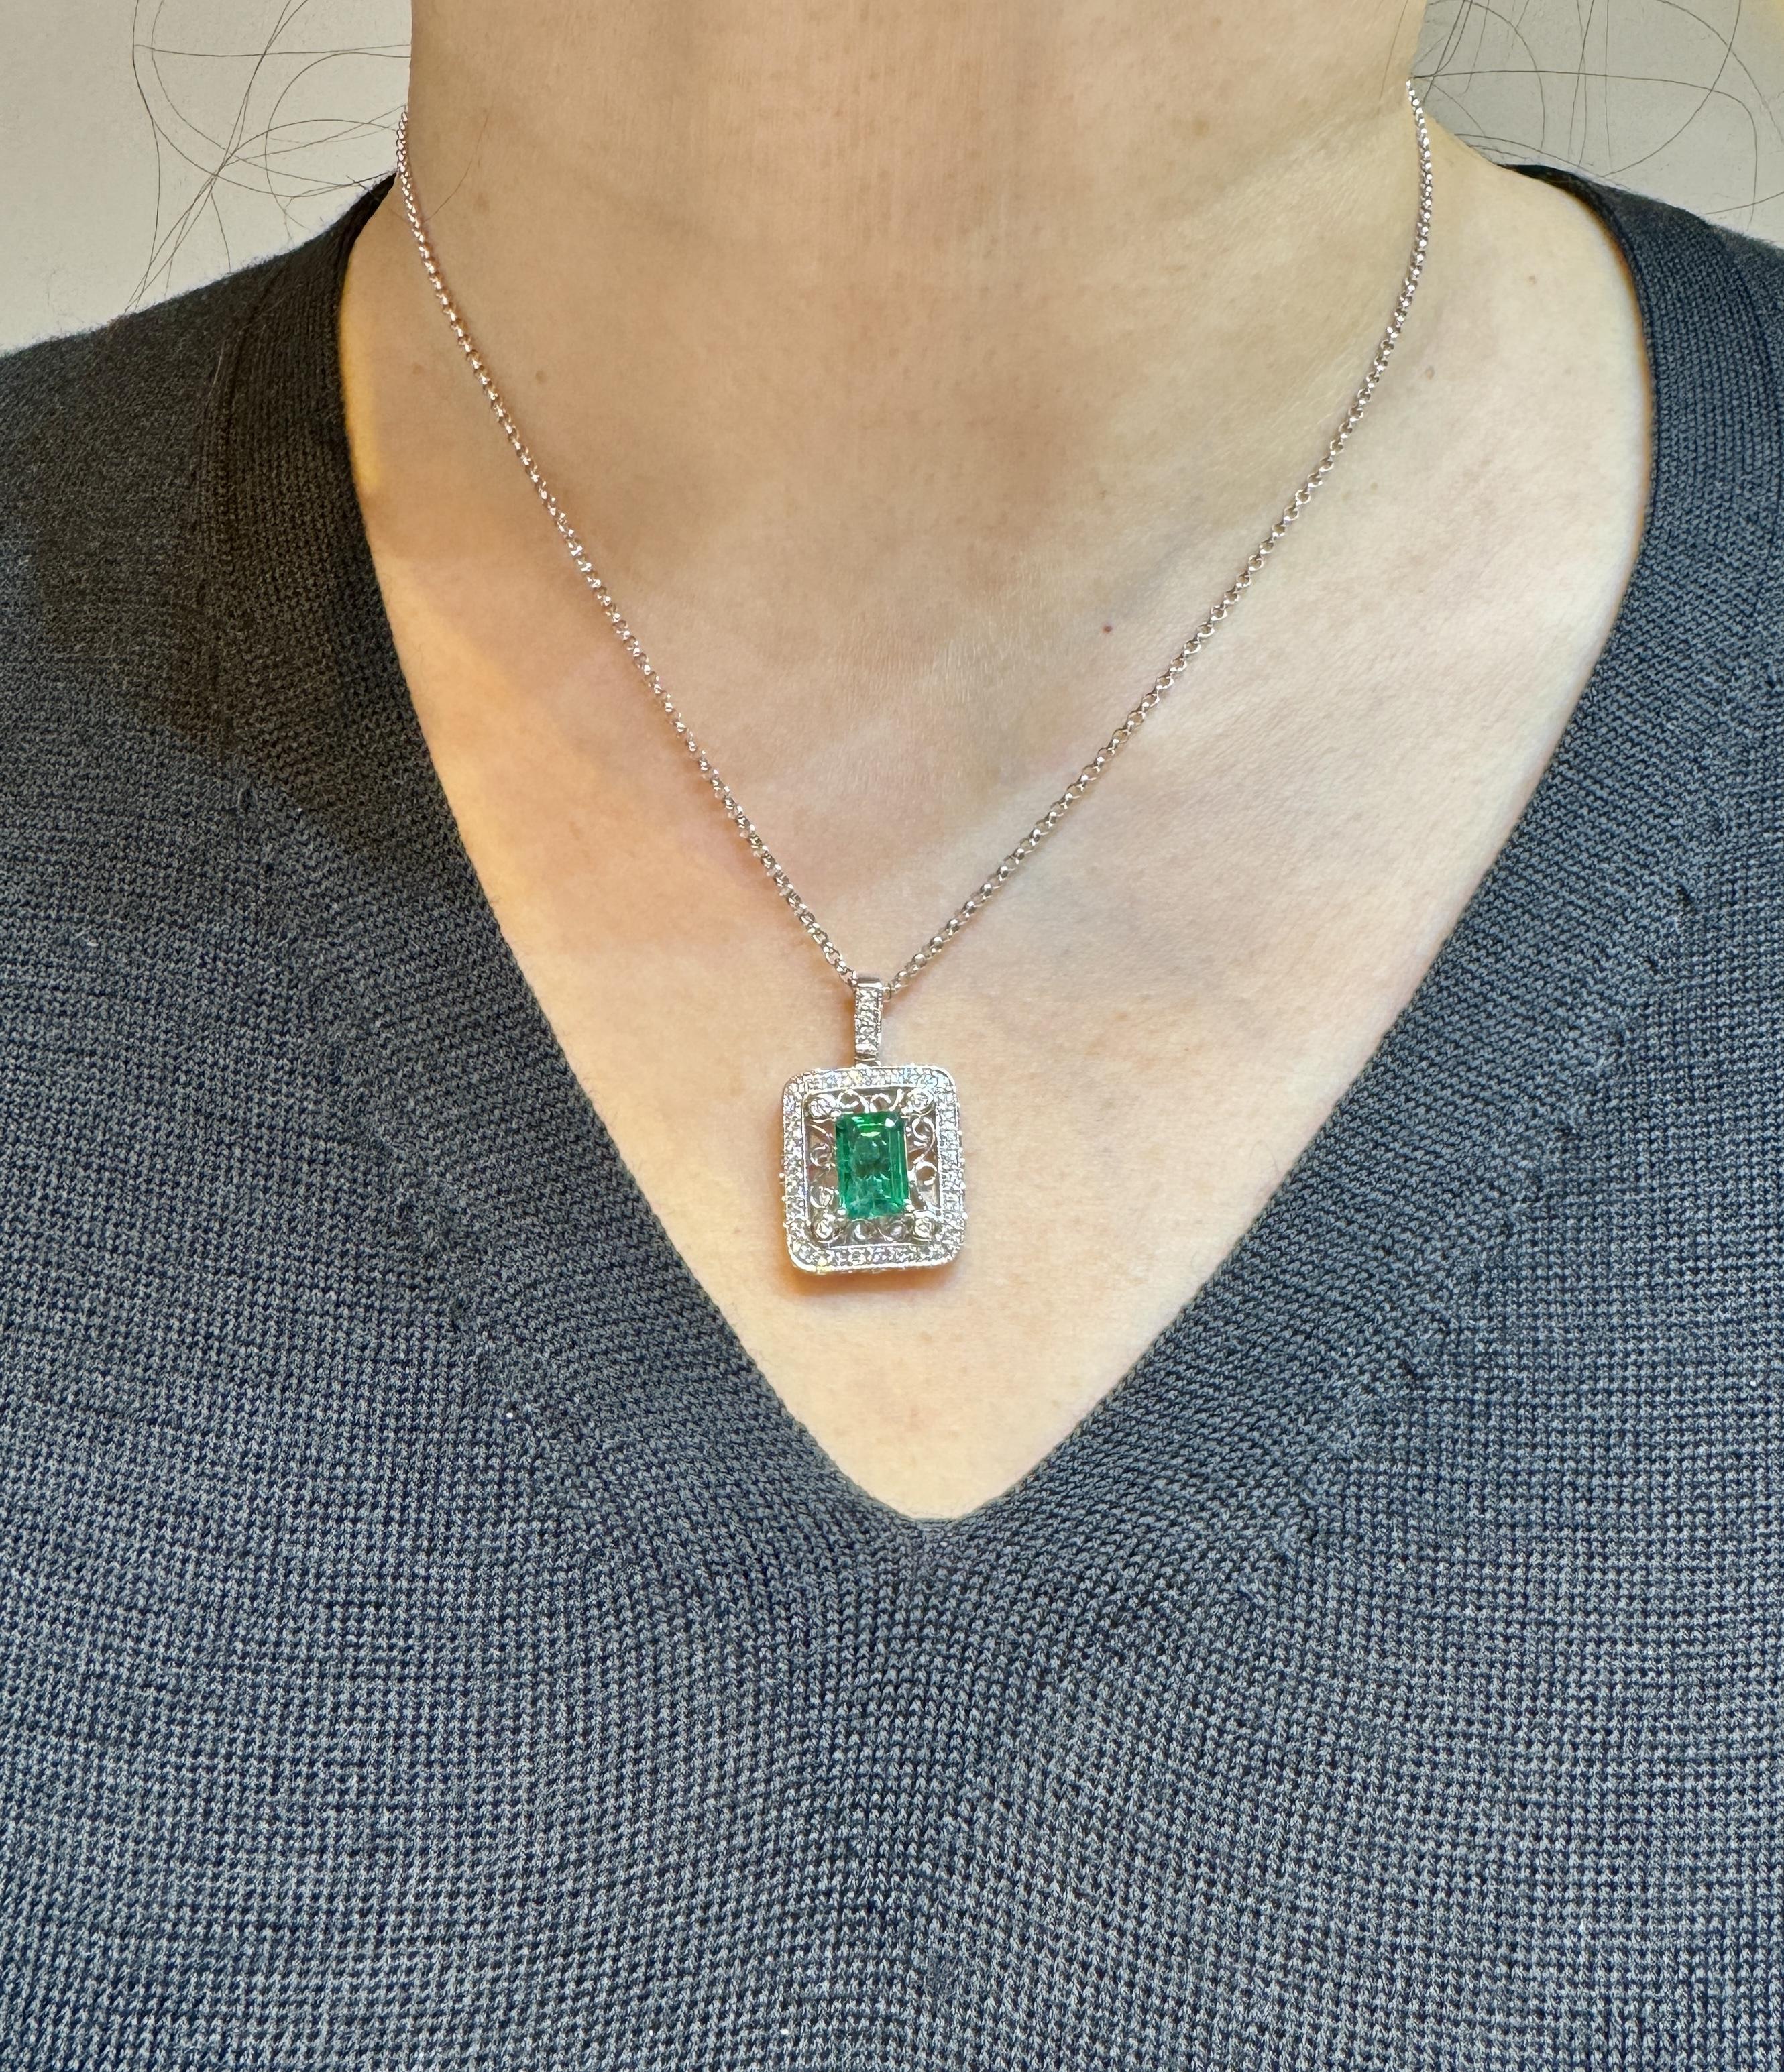 Emerald Cut GIA Certified 1.39 Carat Zambian Emerald and Diamond Floral Box Pendant Necklace For Sale